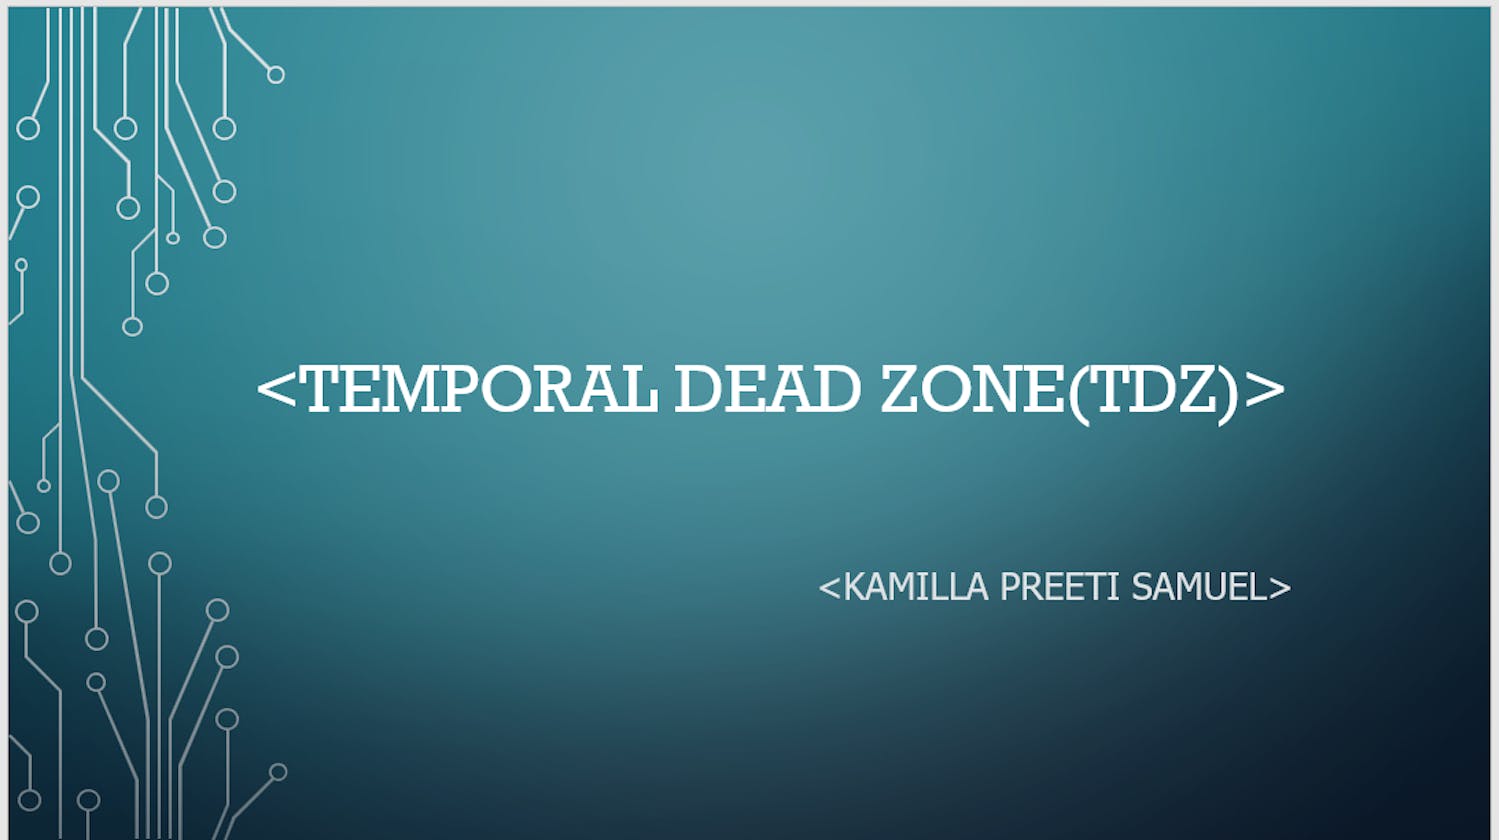 What is Temporal Dead Zone(TDZ)